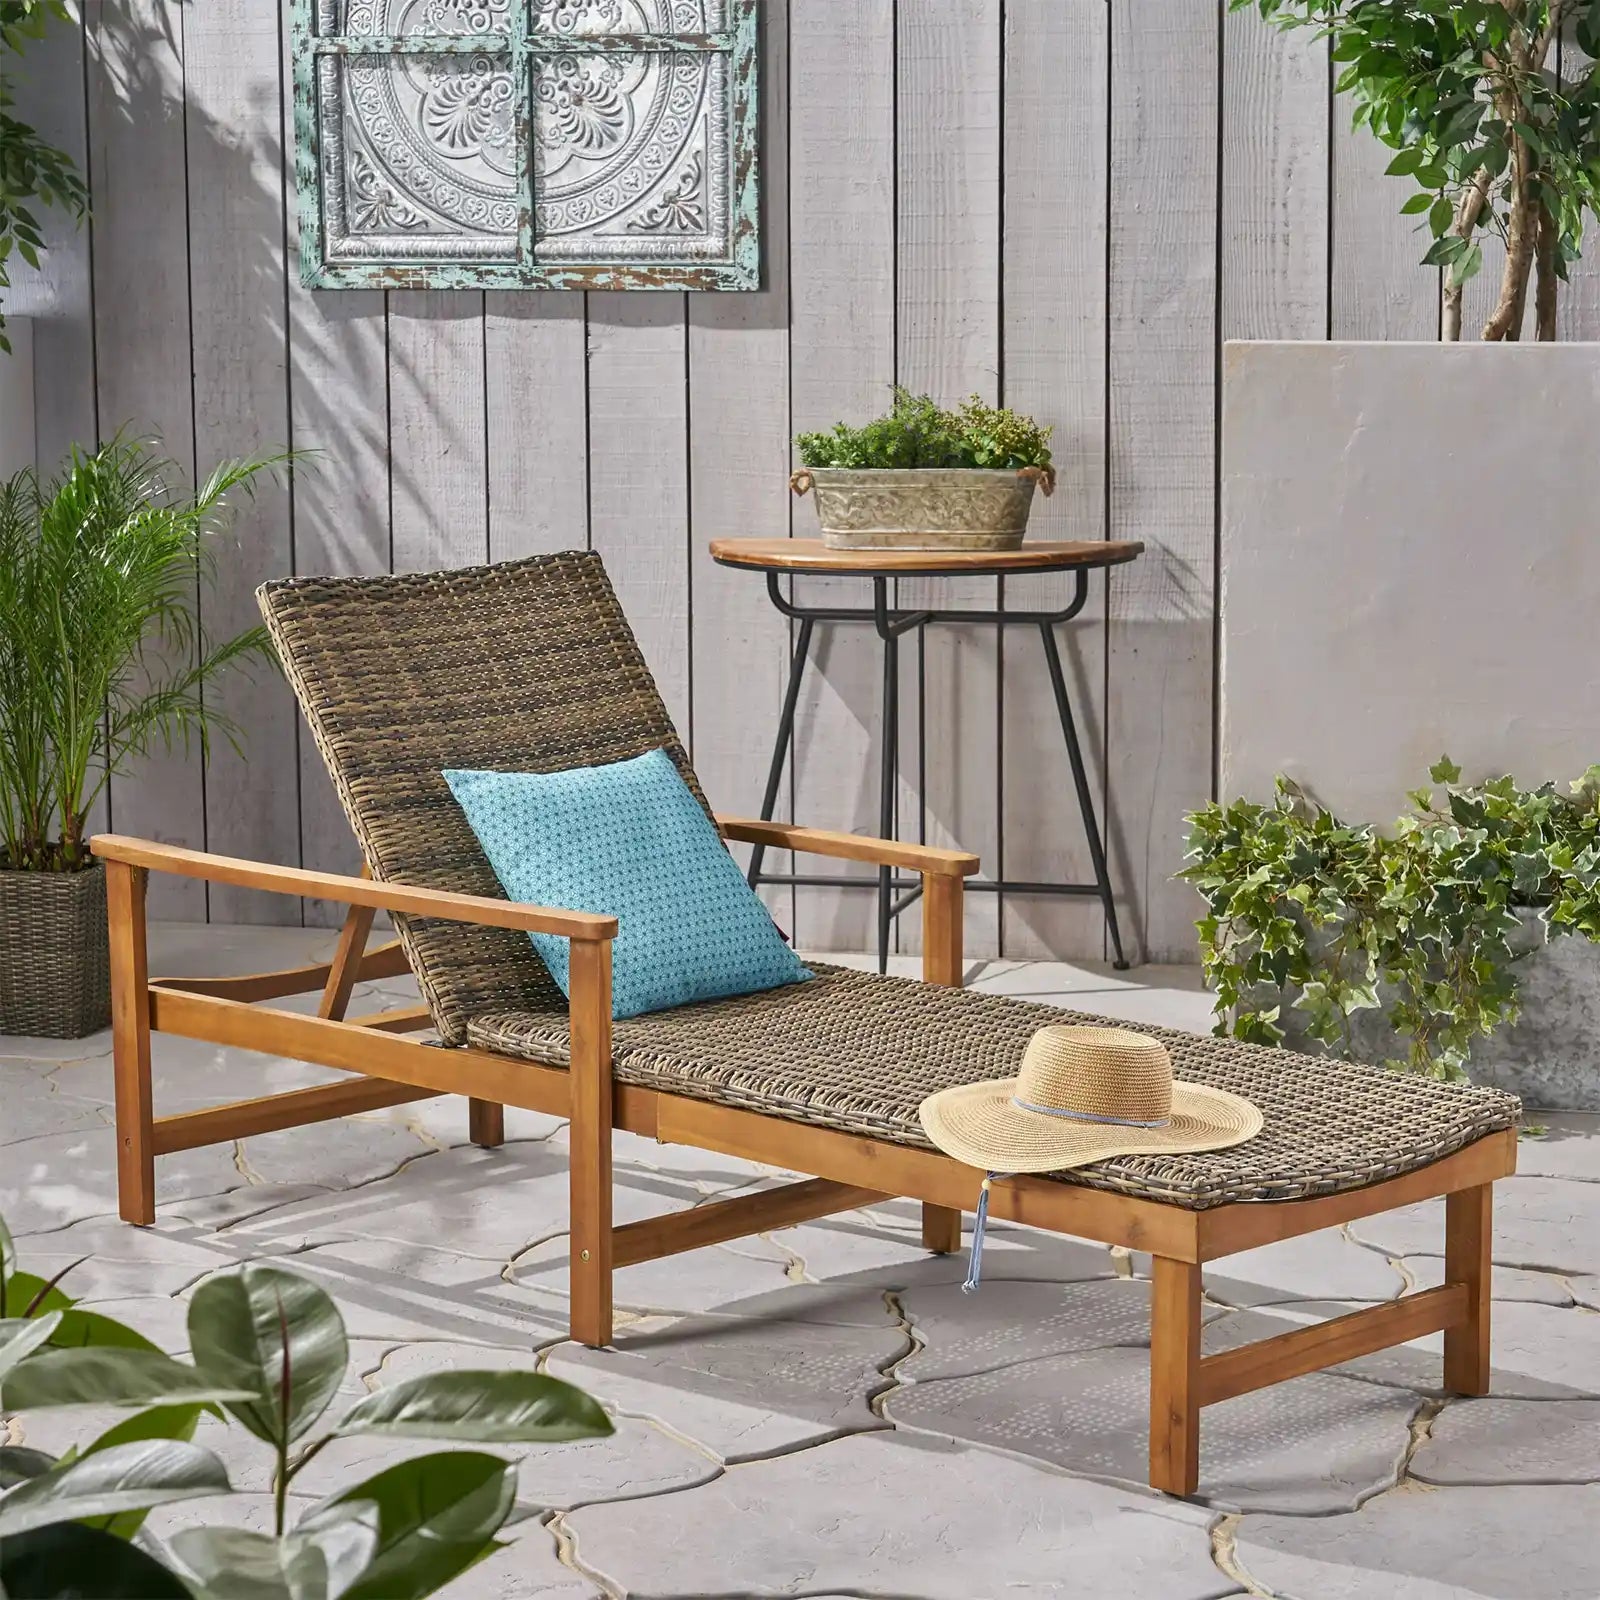 Outdoor Rustic Acacia Wood Chaise Lounge with Wicker Seating